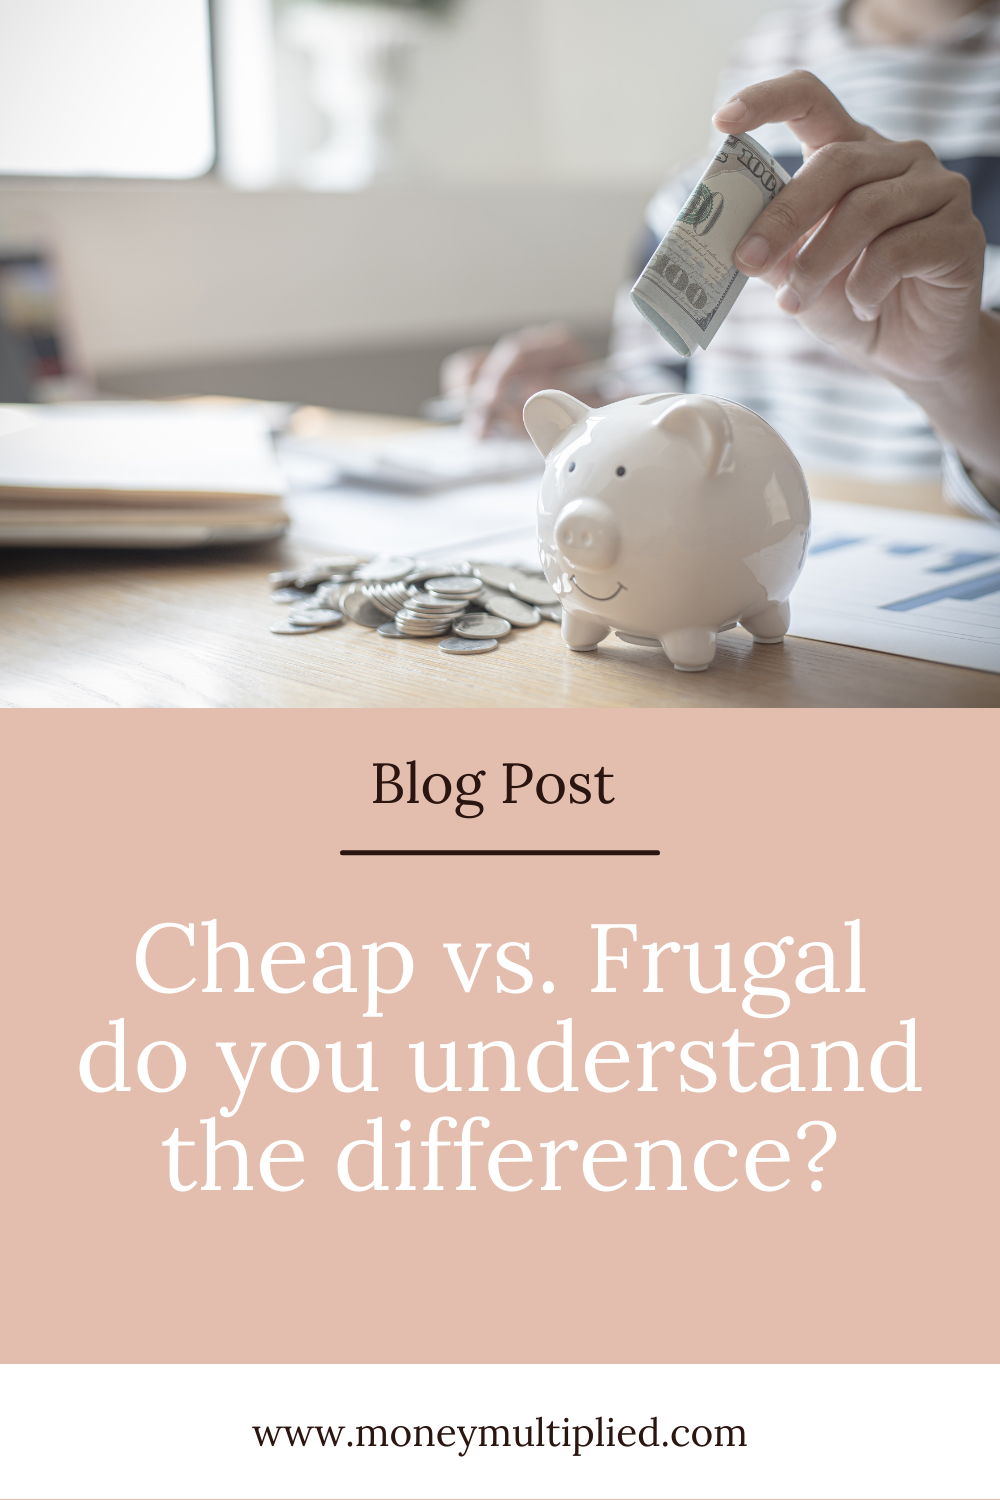 Frugal Vs. Cheap: What is the difference?